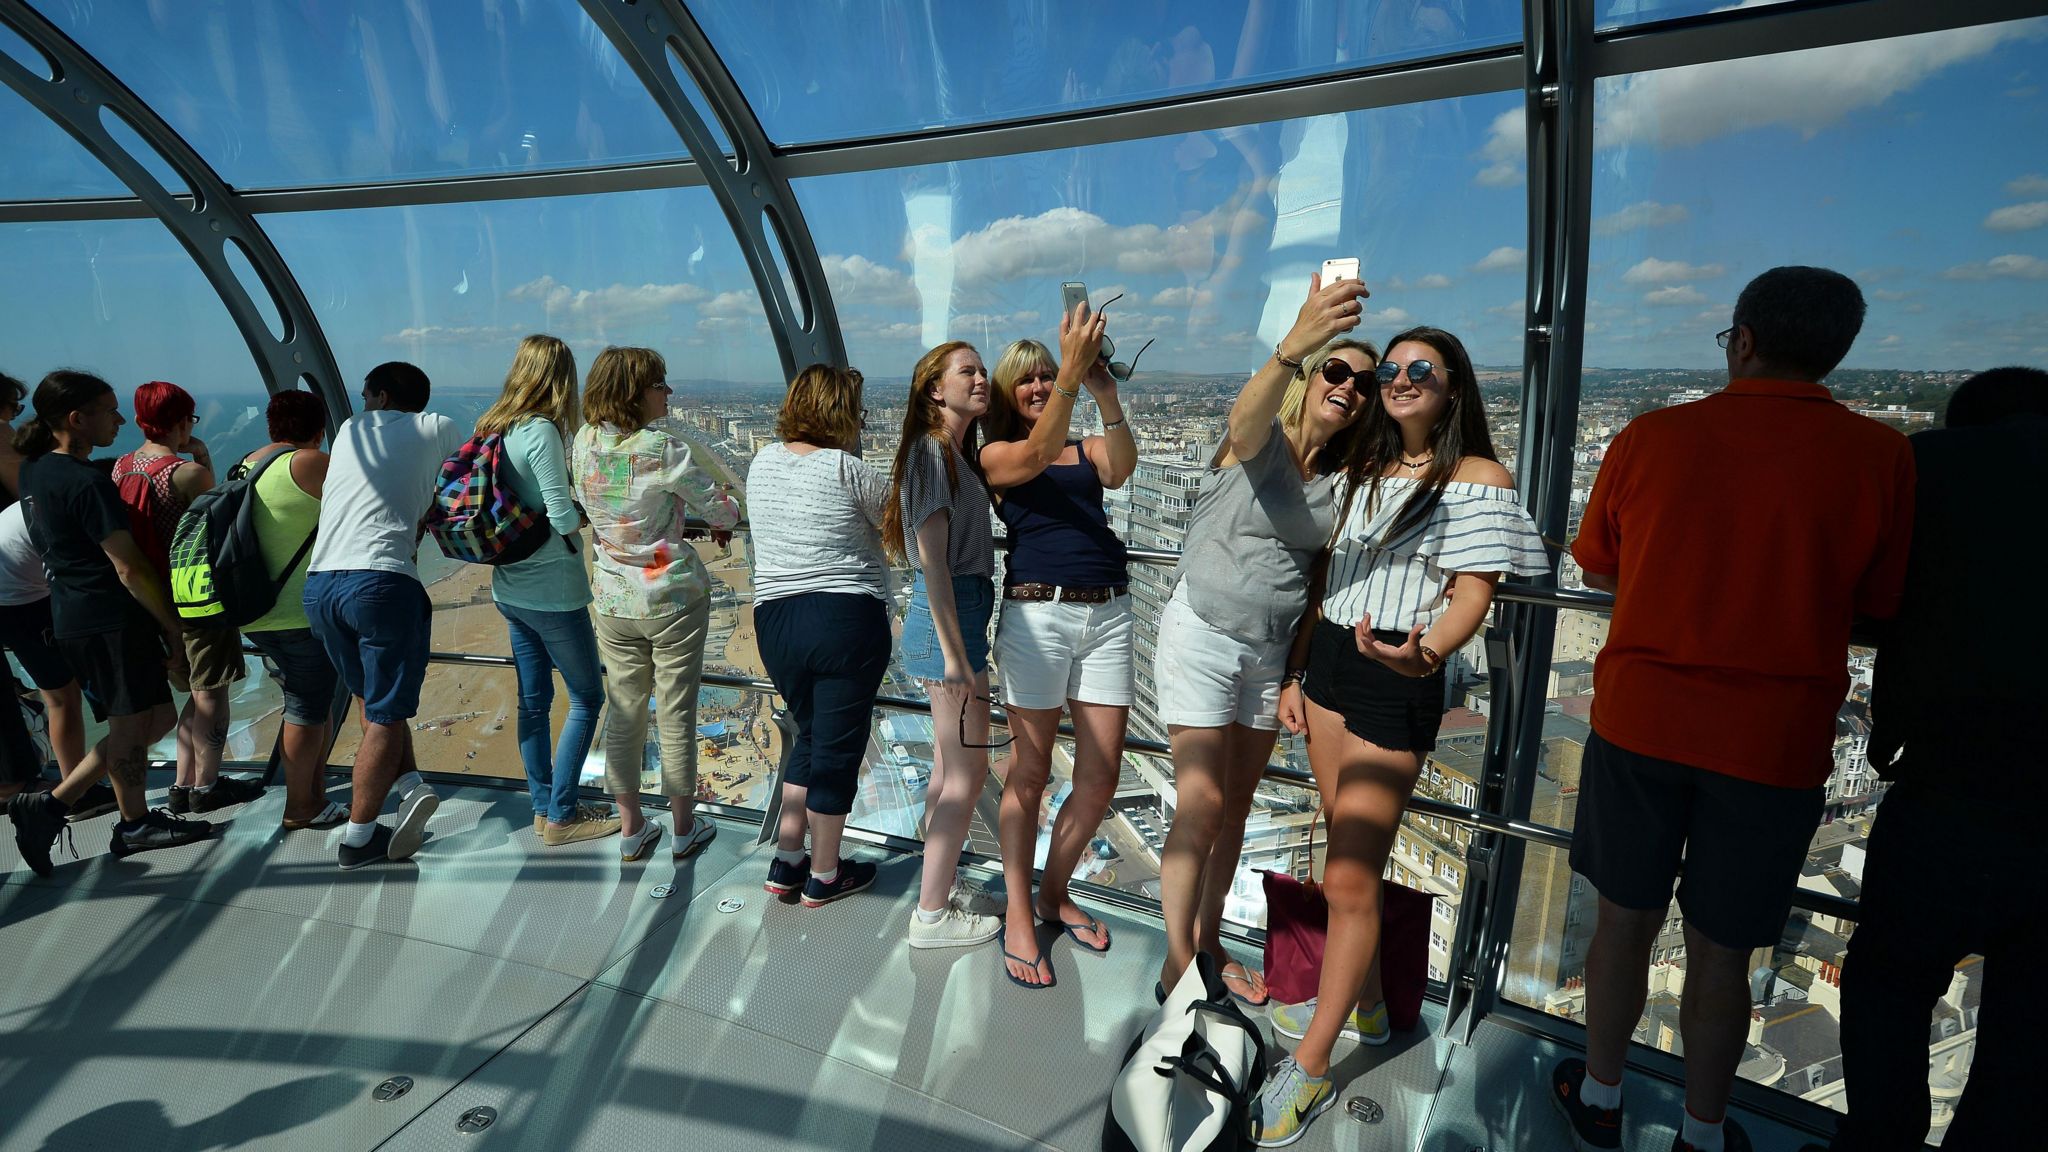 Visitors smile, look at the view and take pictures in Brighton's i360 tower